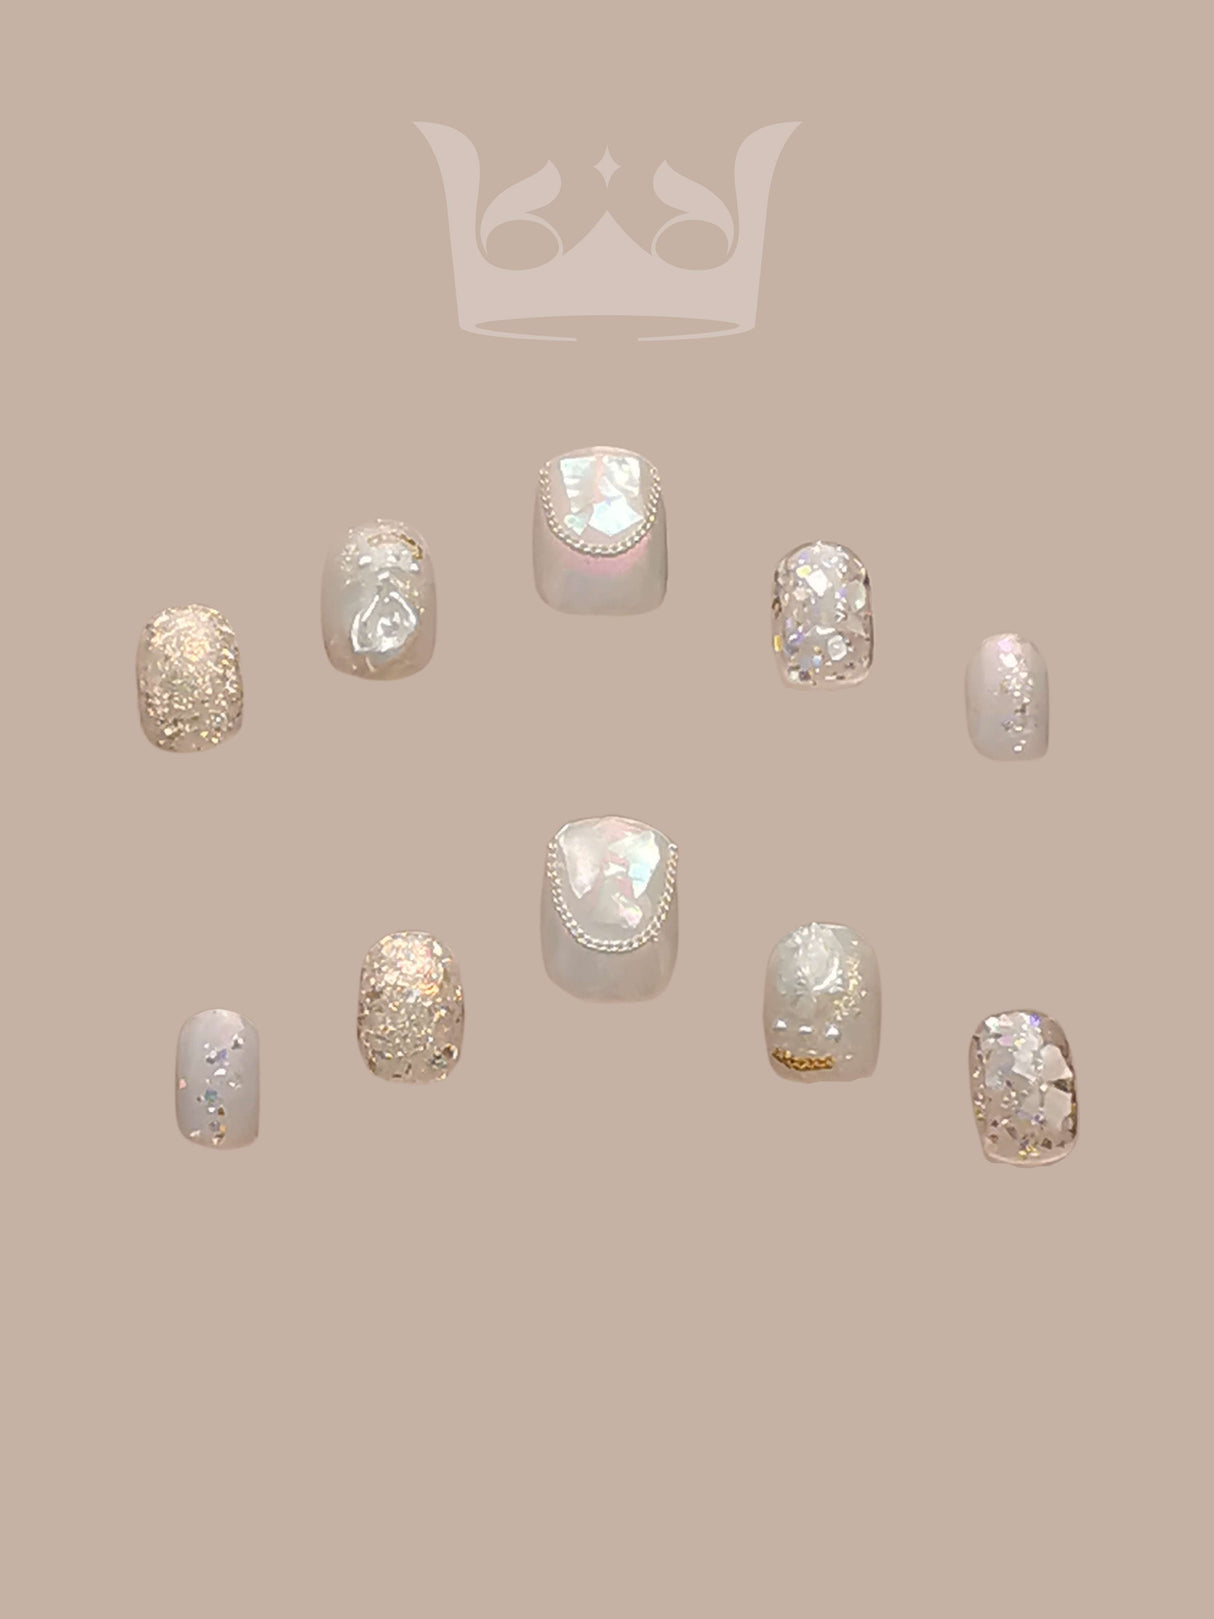 Glamorous and delicate nails with glitter, iridescent accents, and pastel colors are perfect for special occasions or as statement nail art. Suitable for feminine and elegant styles.